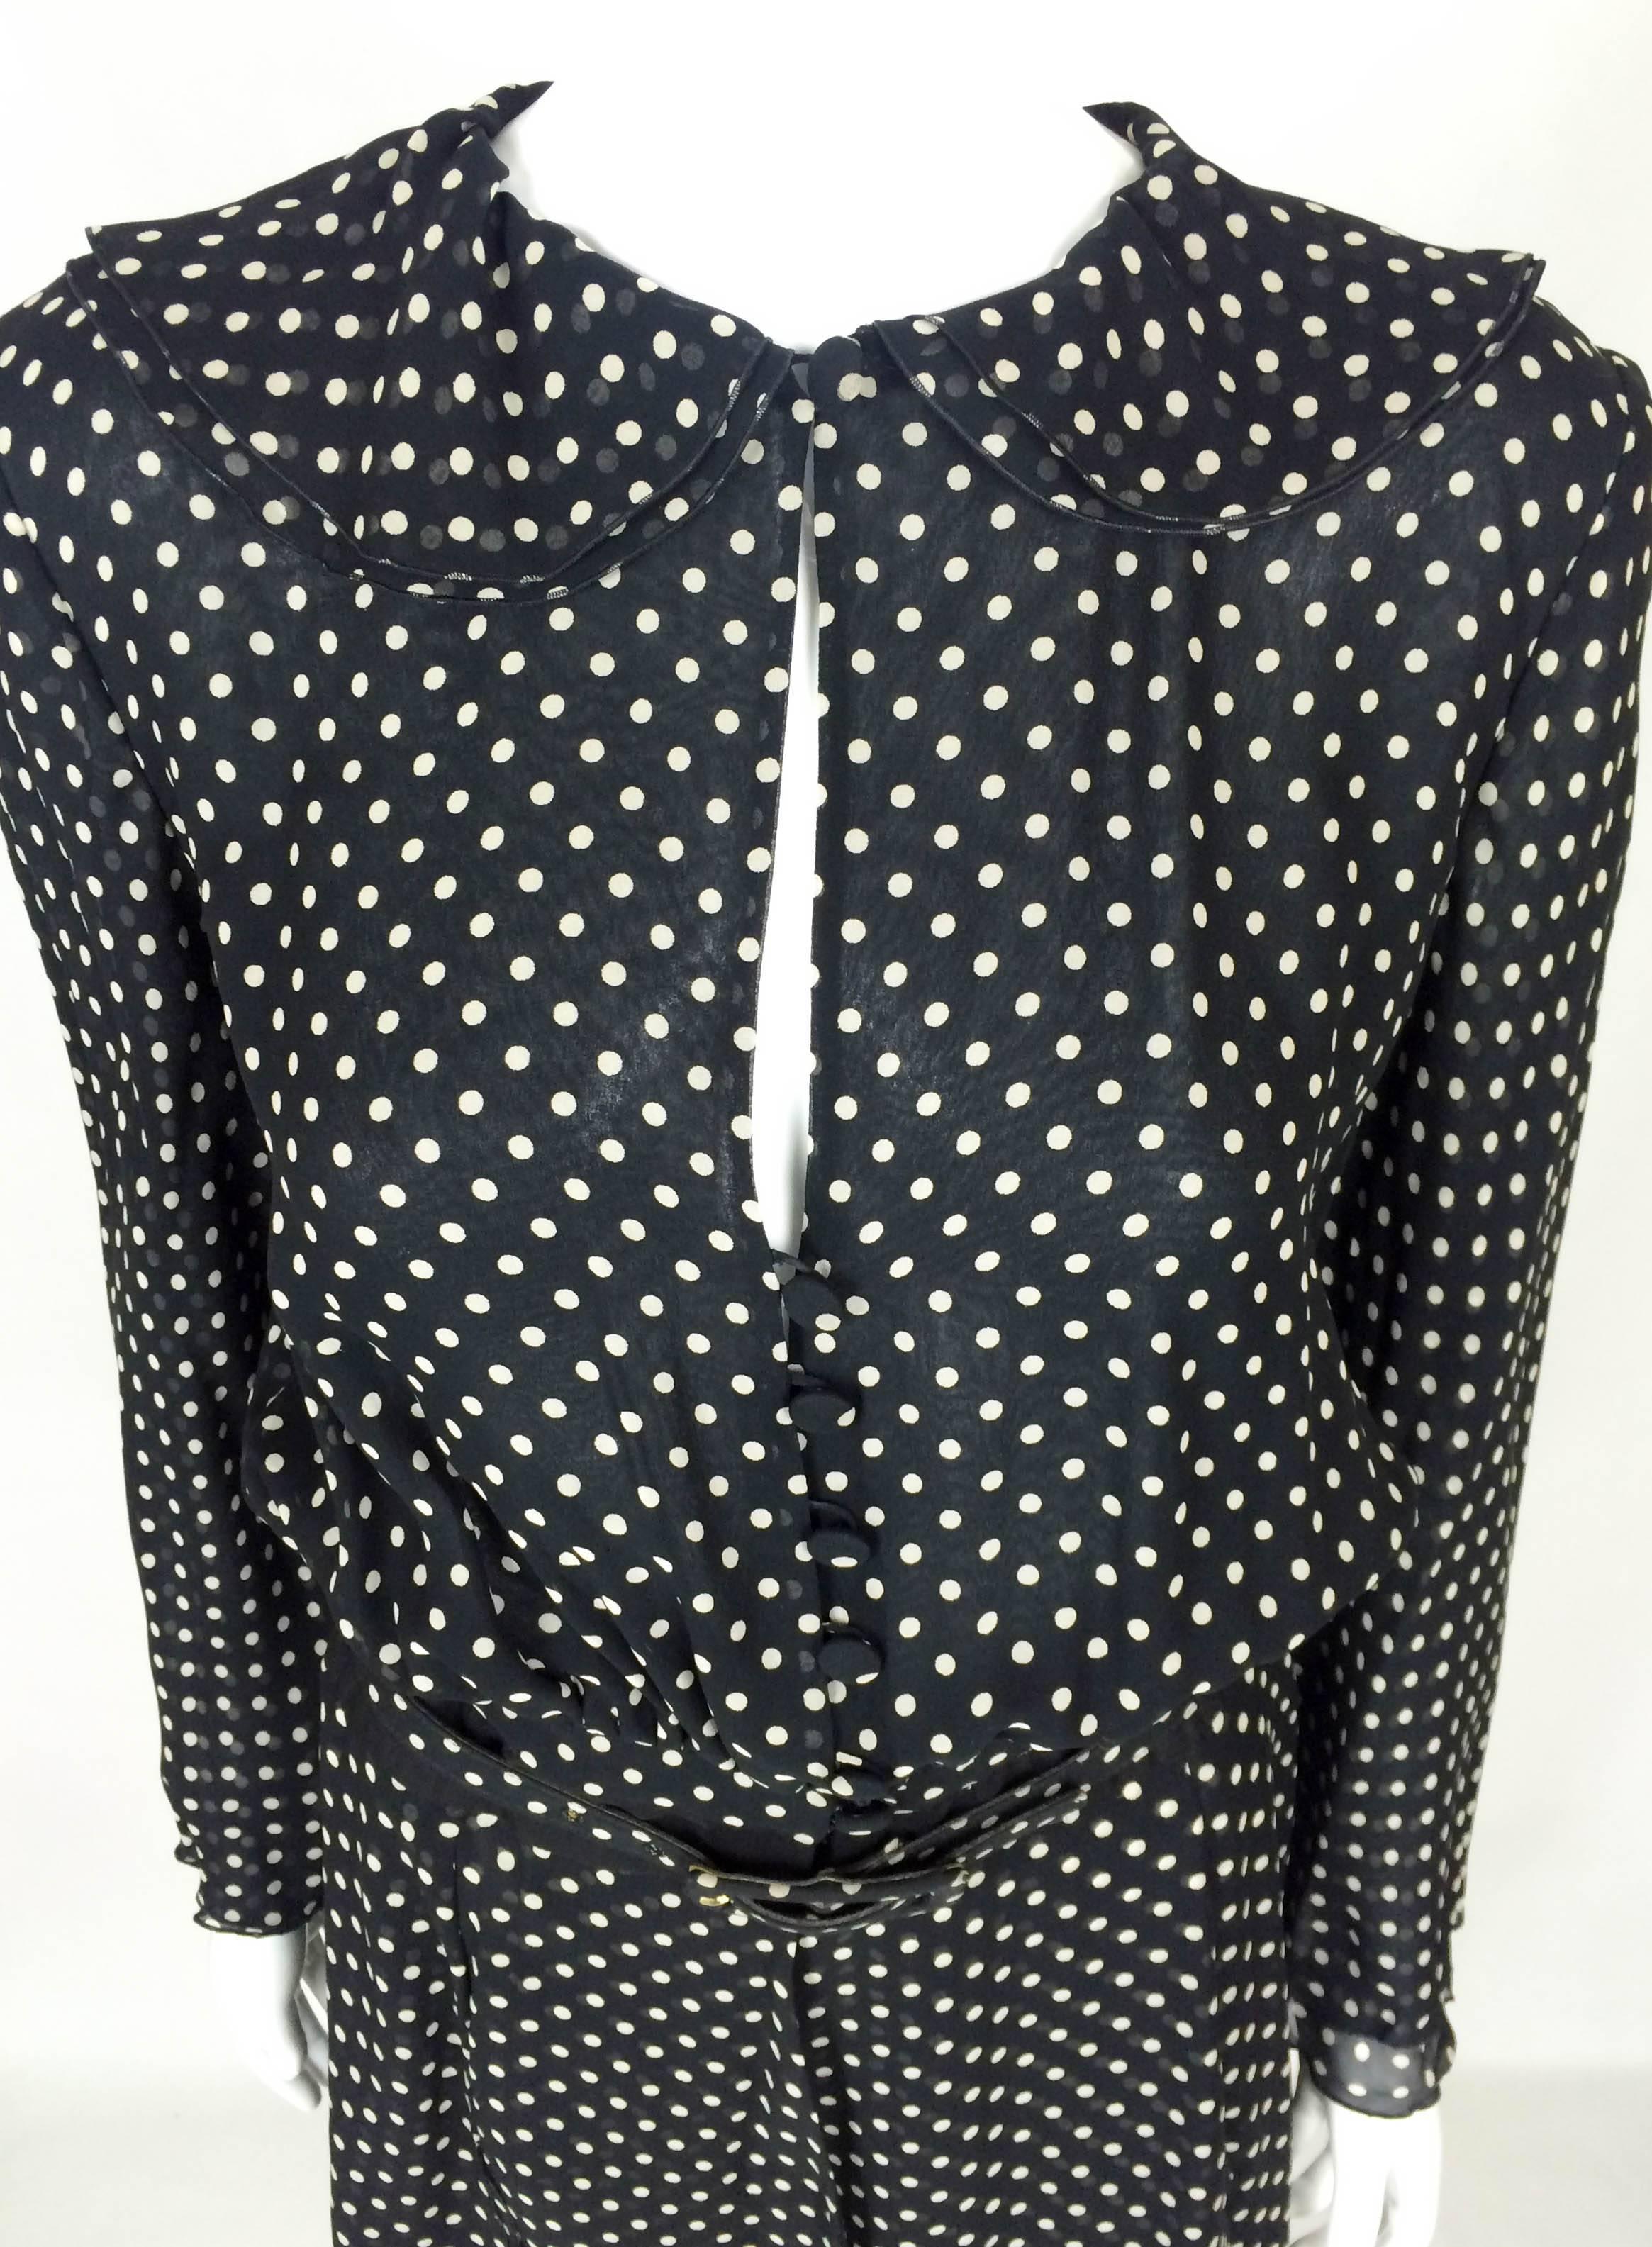 Valentino Silk Polka Dot Dress - 1970s In Excellent Condition In London, Chelsea